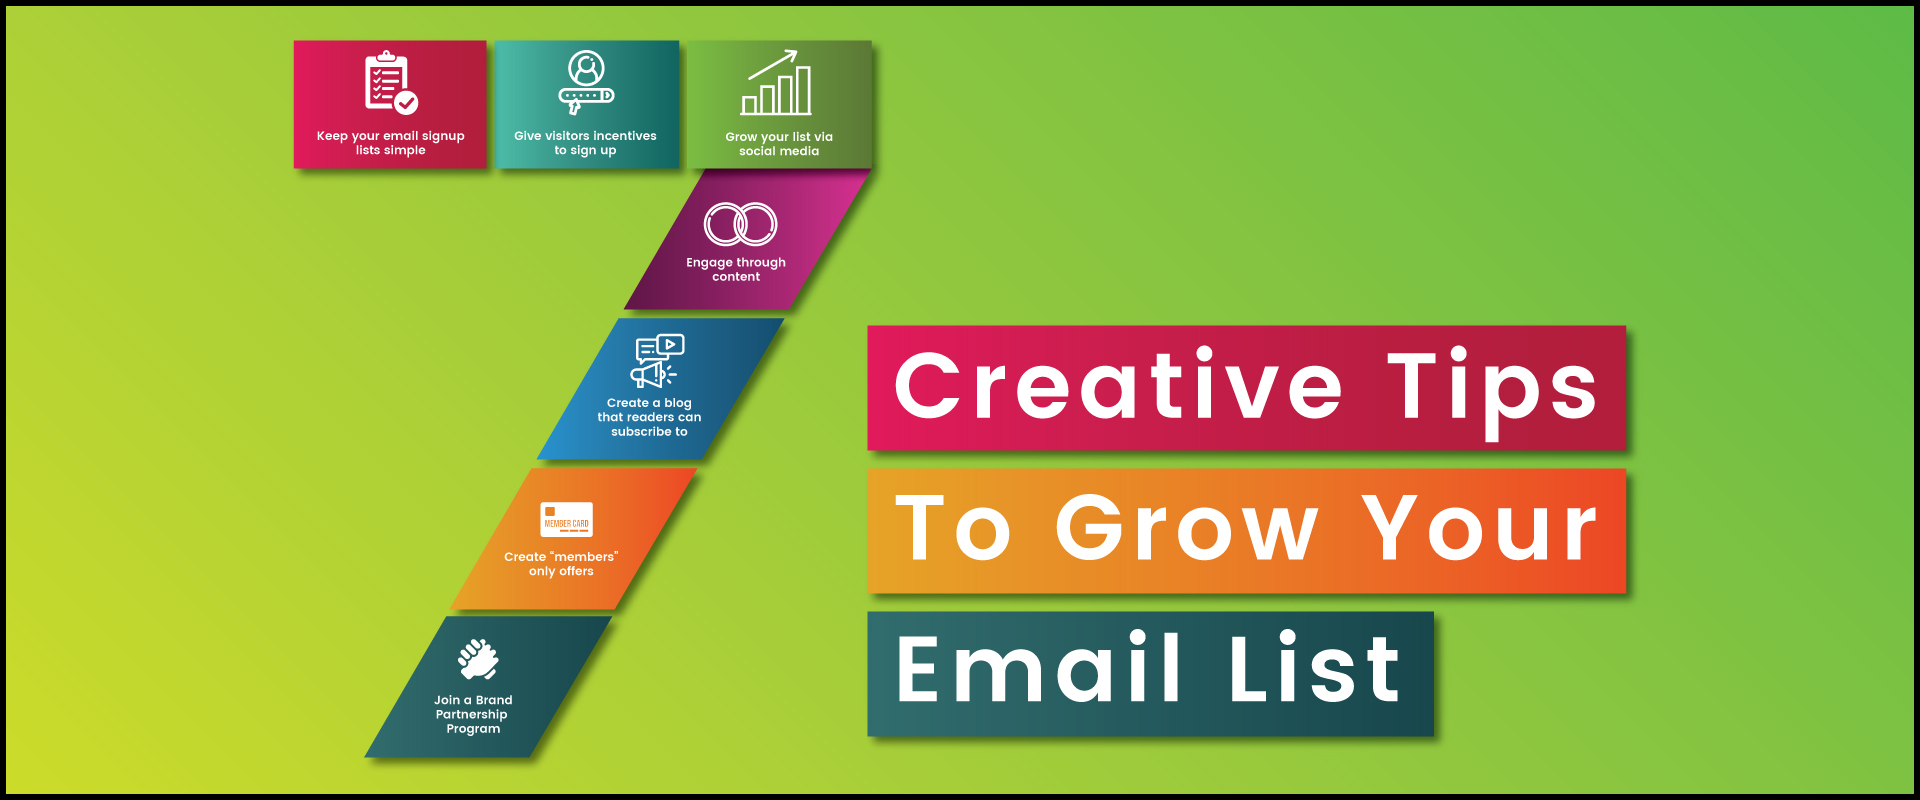 Grow Your Email List With These 7 Creative Tips